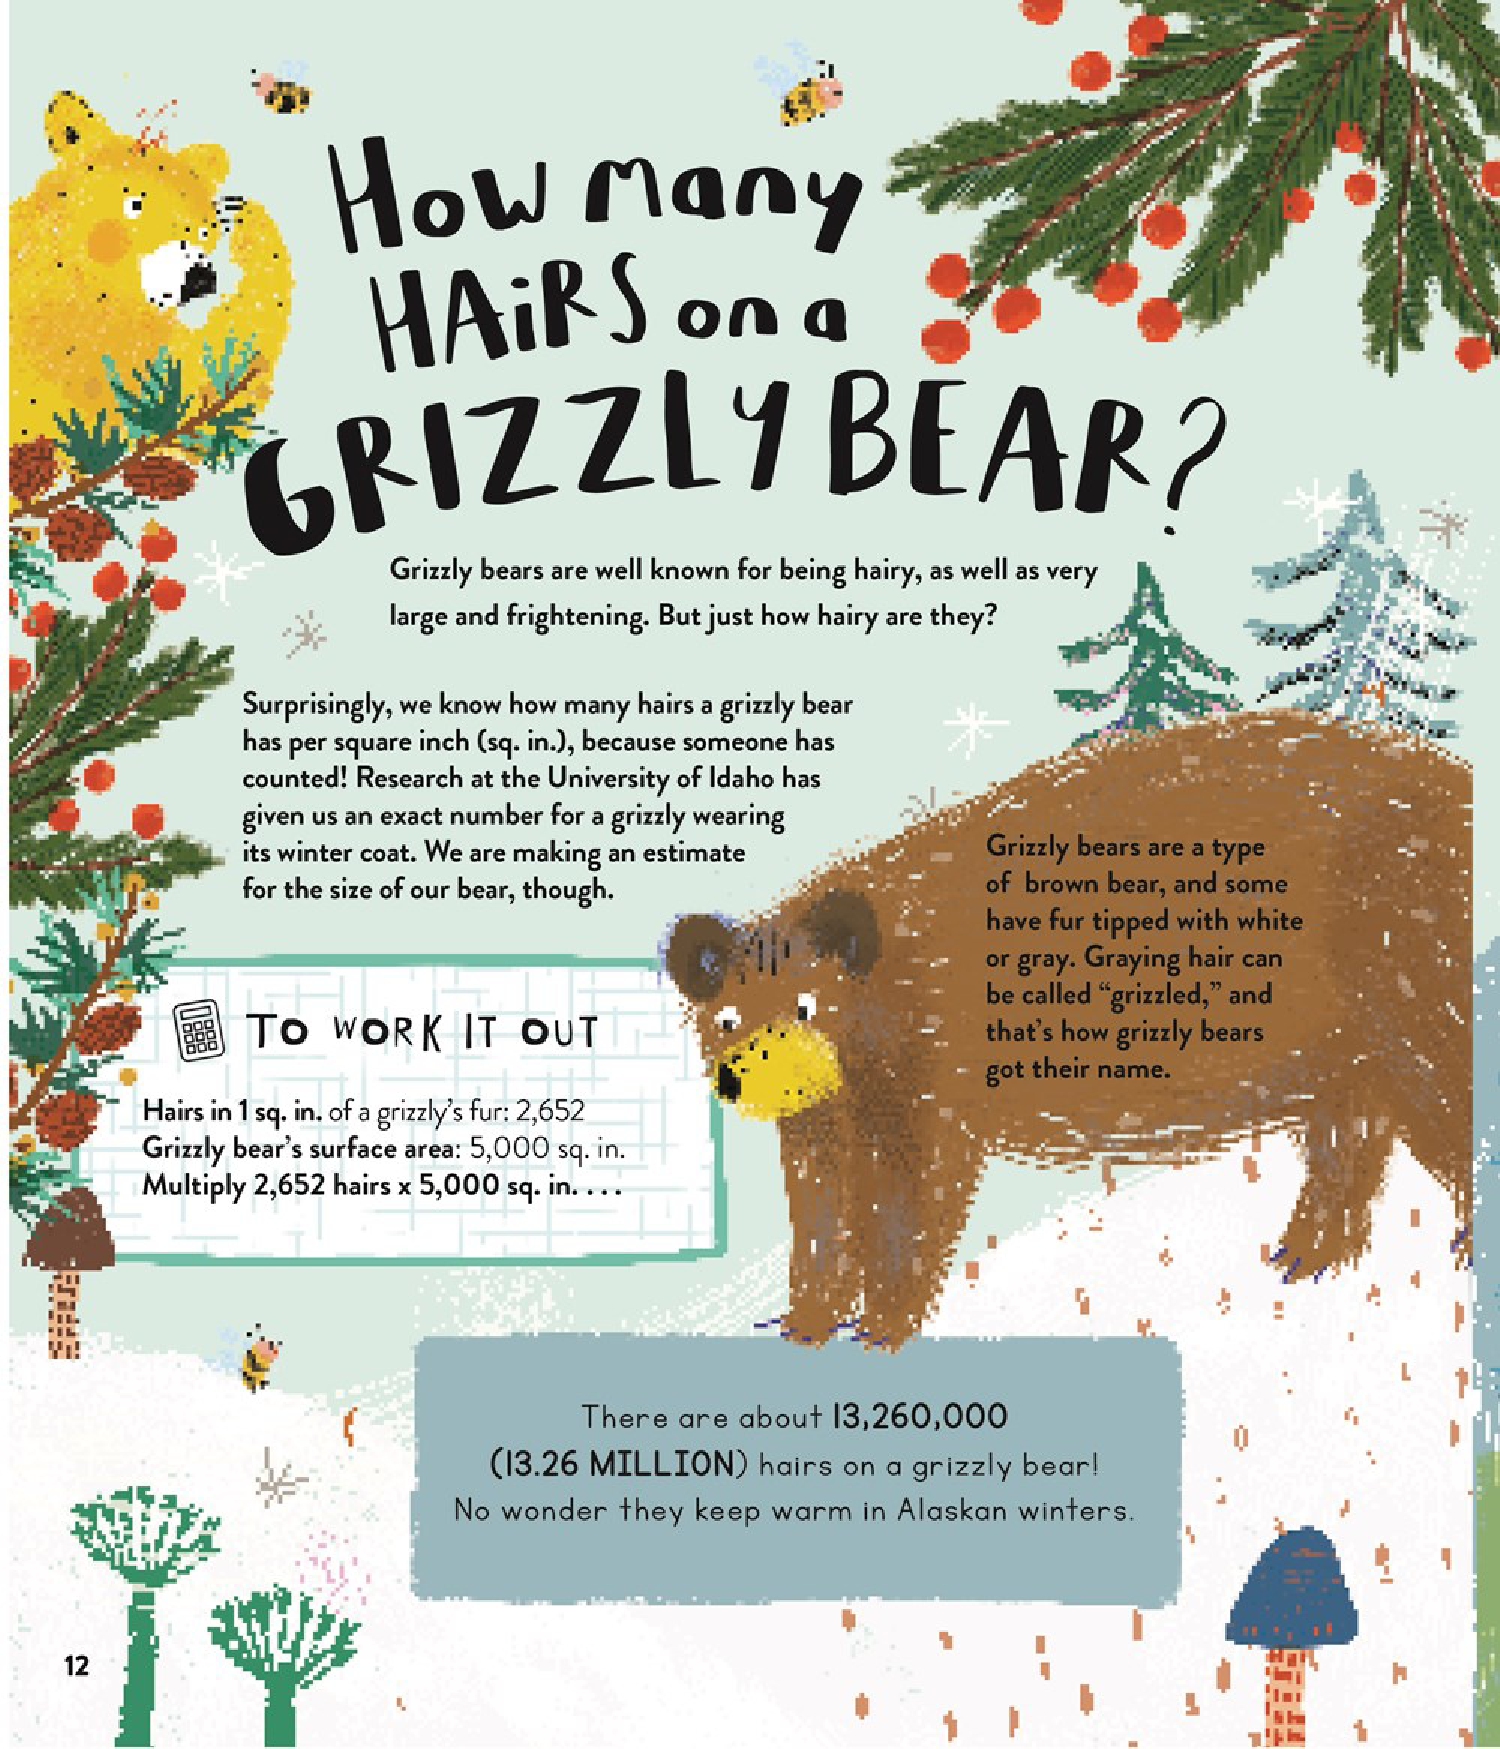 How Many Hairs on a Grizzly Bear?